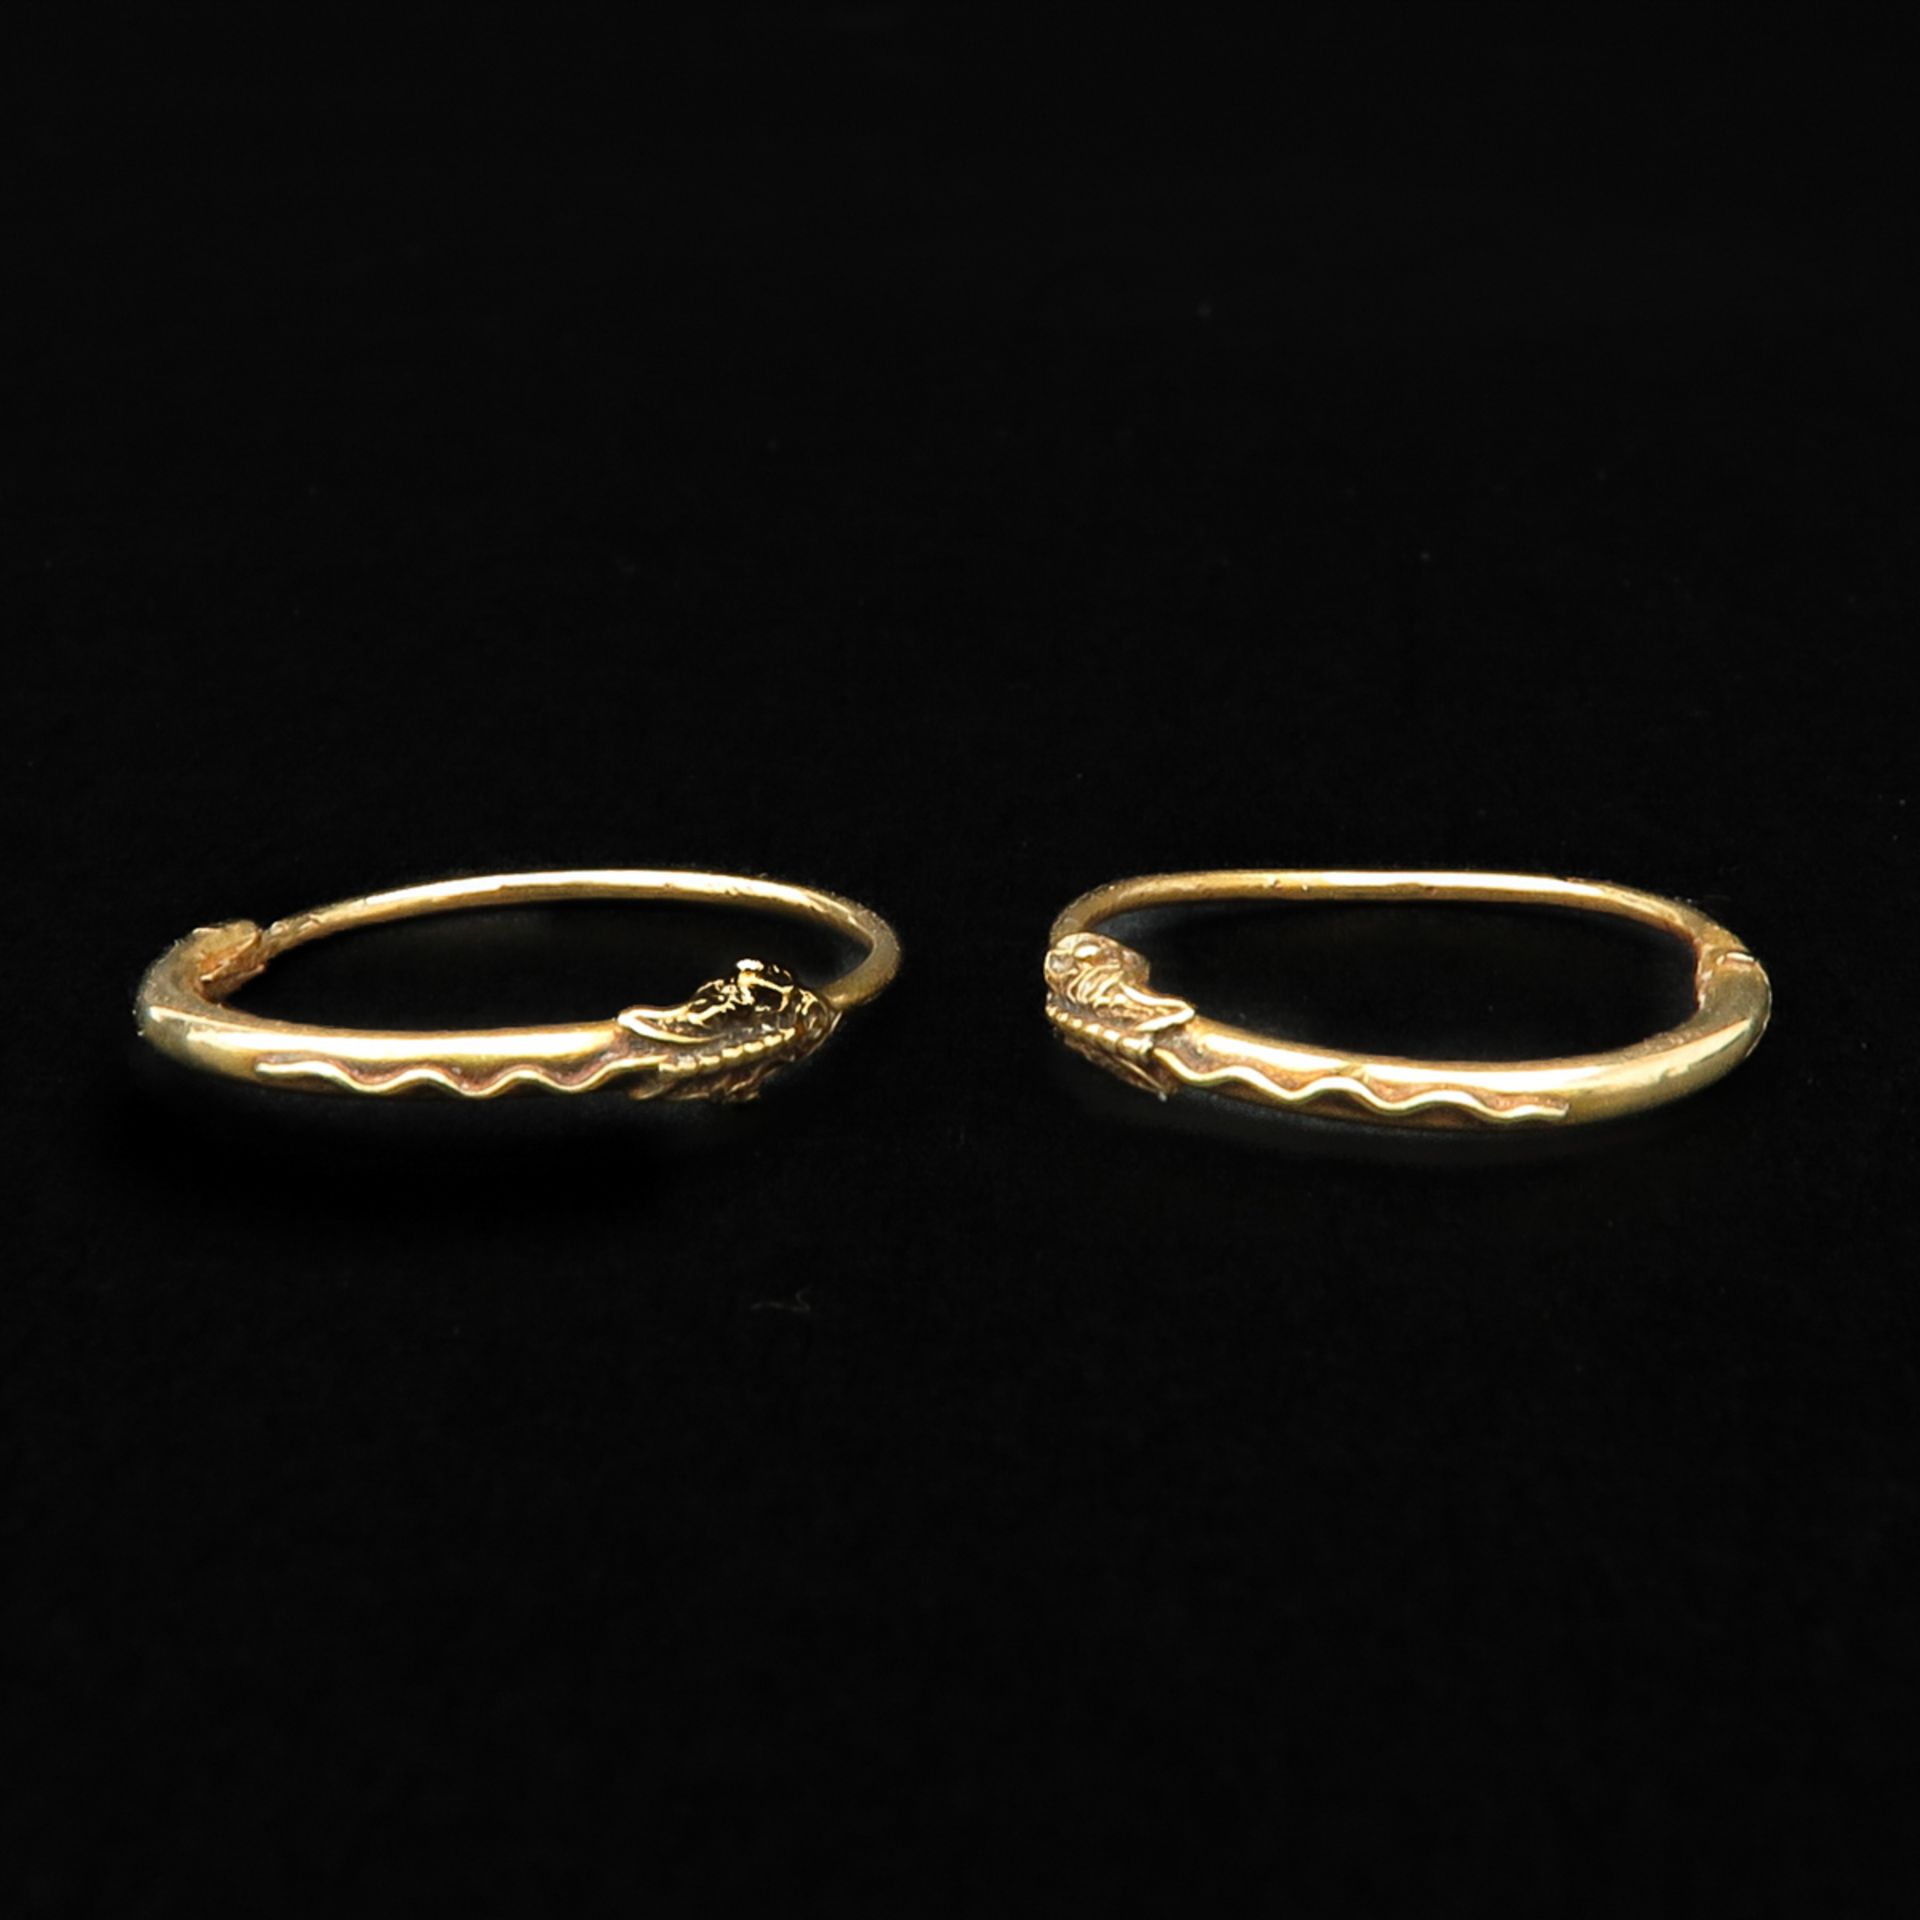 A Pair of 19th Century Fisherman Earrings - Image 3 of 4